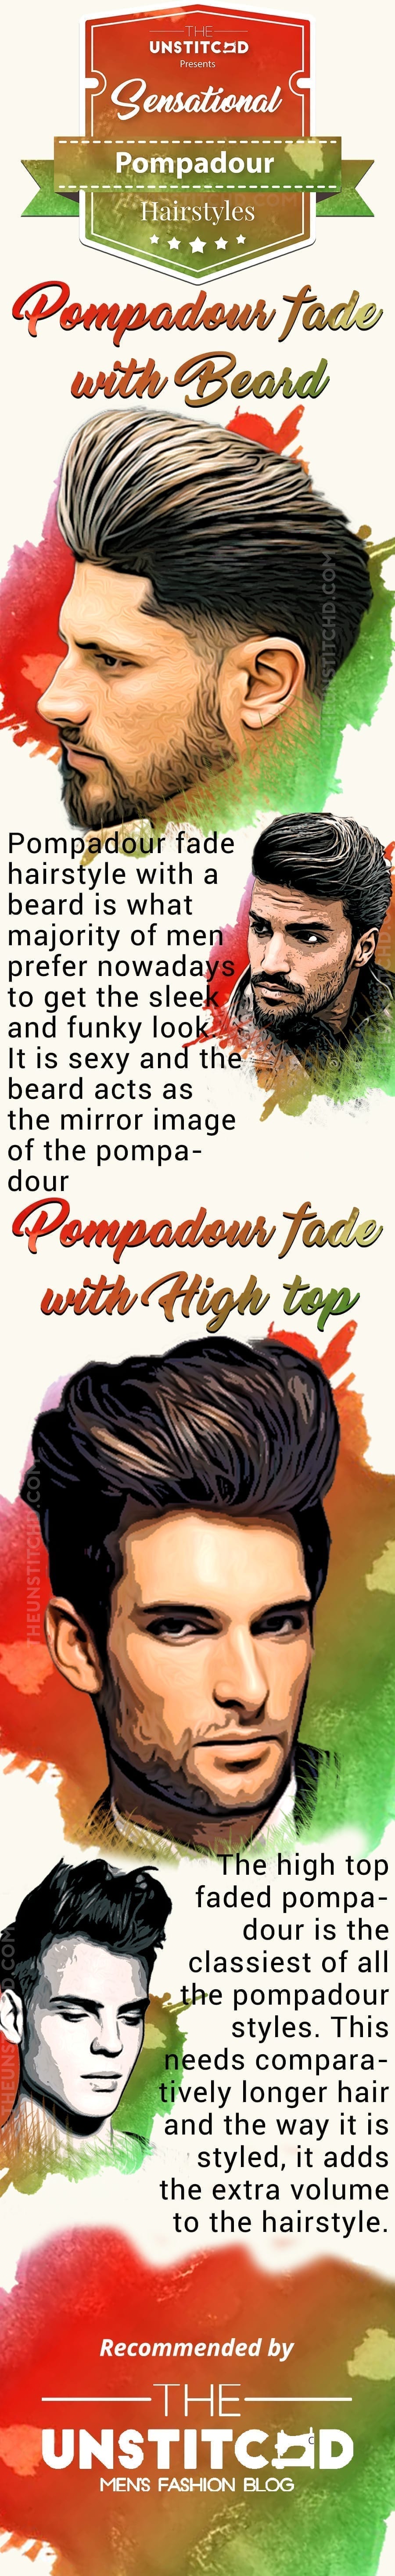 pompadour-fade-hairstyle-info